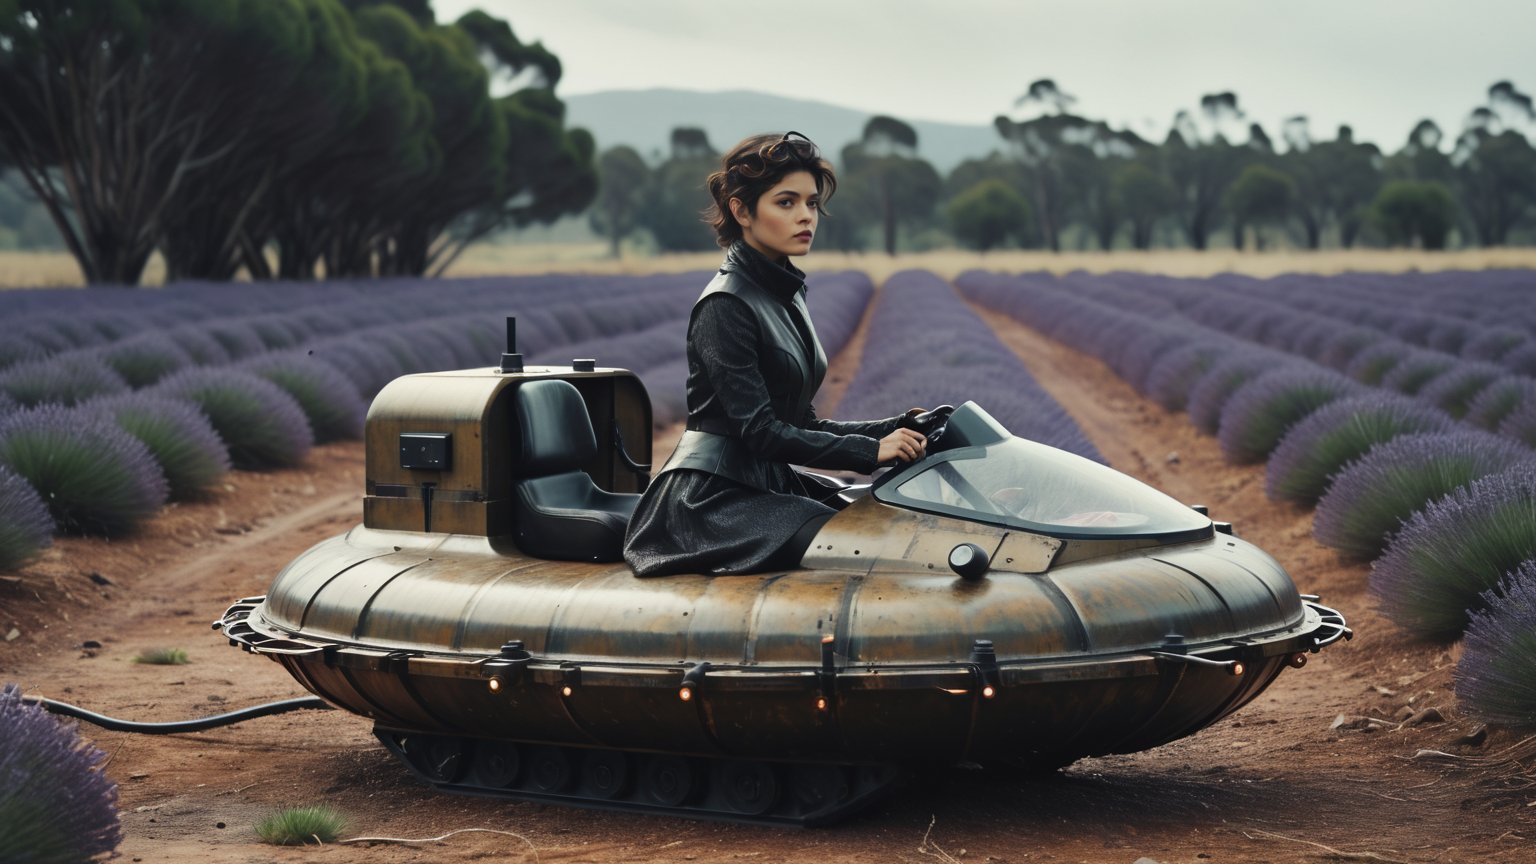 (((full body sexy cyberpunk android with mechanical parts Audrey Tautou sits on a futuristic hovercraft flying vehicle near a large electric charging station))), ((vintage dystopian landing pad in the middle of a lavender field background)), ((lighting dust particles)), horror movie scene, best quality, masterpiece, (photorealistic:1.4), 8k uhd, dslr, masterpiece photoshoot, (in the style of Hans Heysen and Carne Griffiths),shot on Canon EOS 5D Mark IV DSLR, 85mm lens, long exposure time, f/8, ISO 100, shutter speed 1/125, award winning photograph, facing camera, perfect contrast,cinematic style